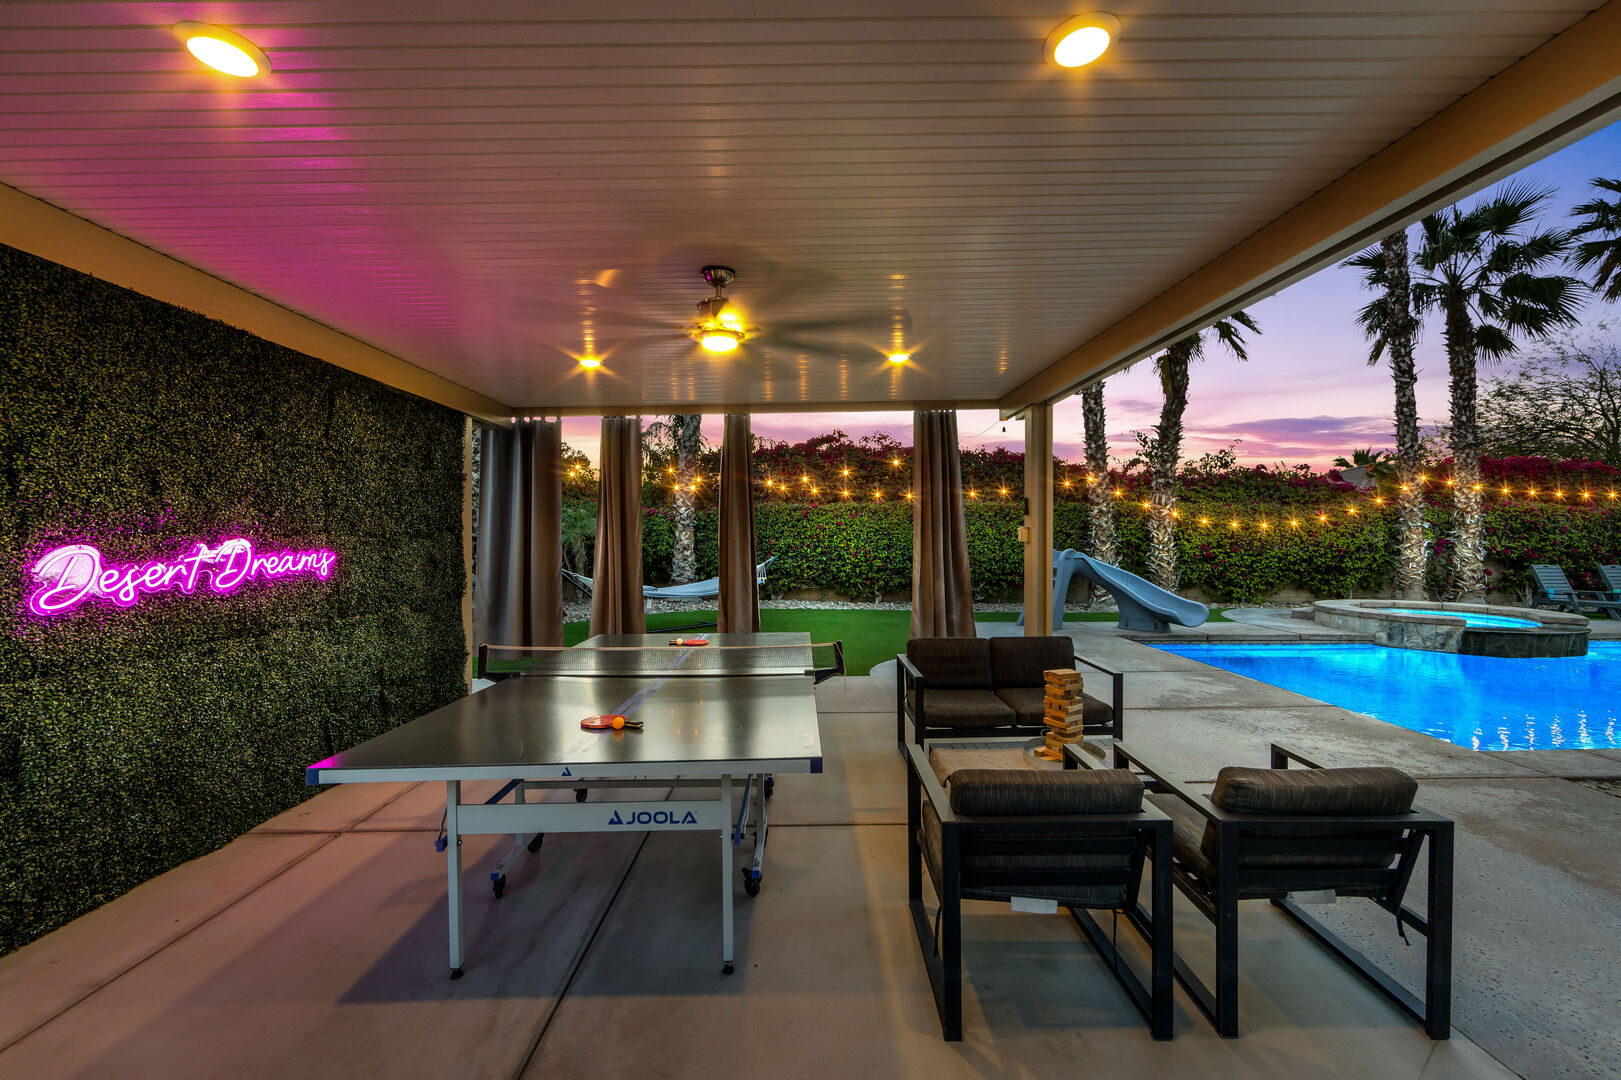 The shaded outdoor area features a ping pong table, an overhead fan with lighting, and a selfie-worthy faux background adorned with a light-up neon sign.